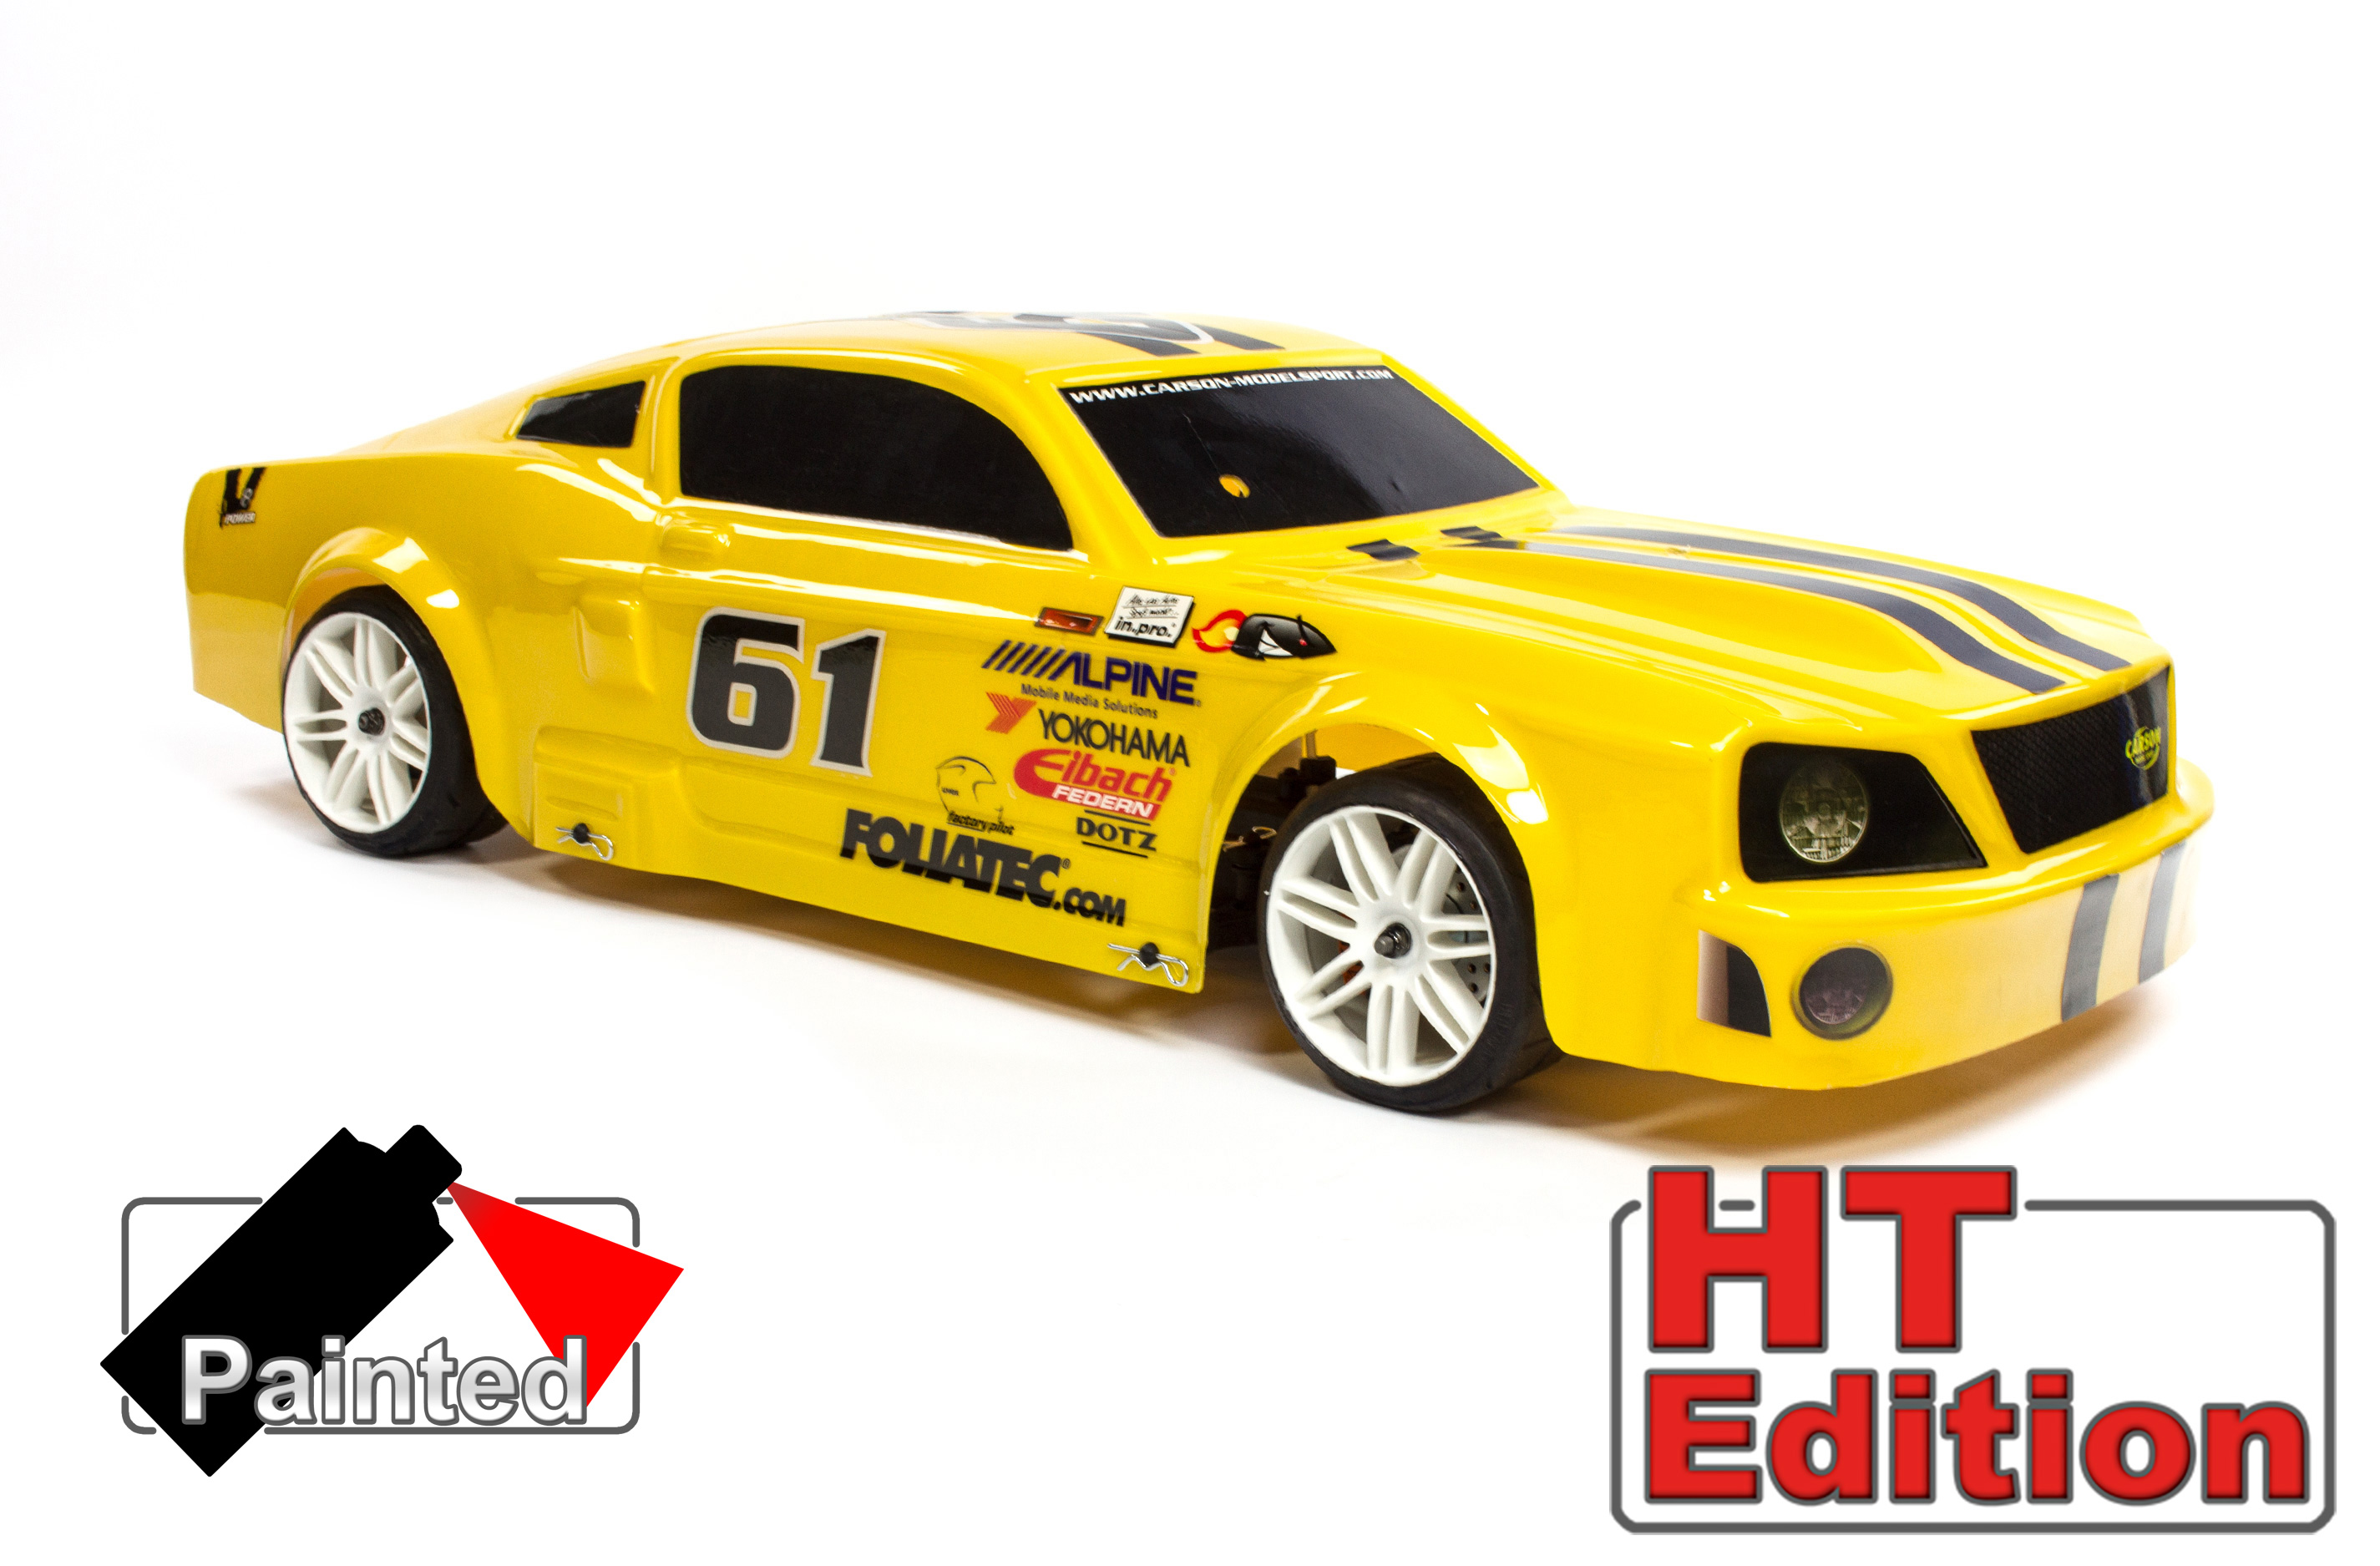 FG Sportsline with Ford Mustang body shell, 23cm³ Engine HT-Edition